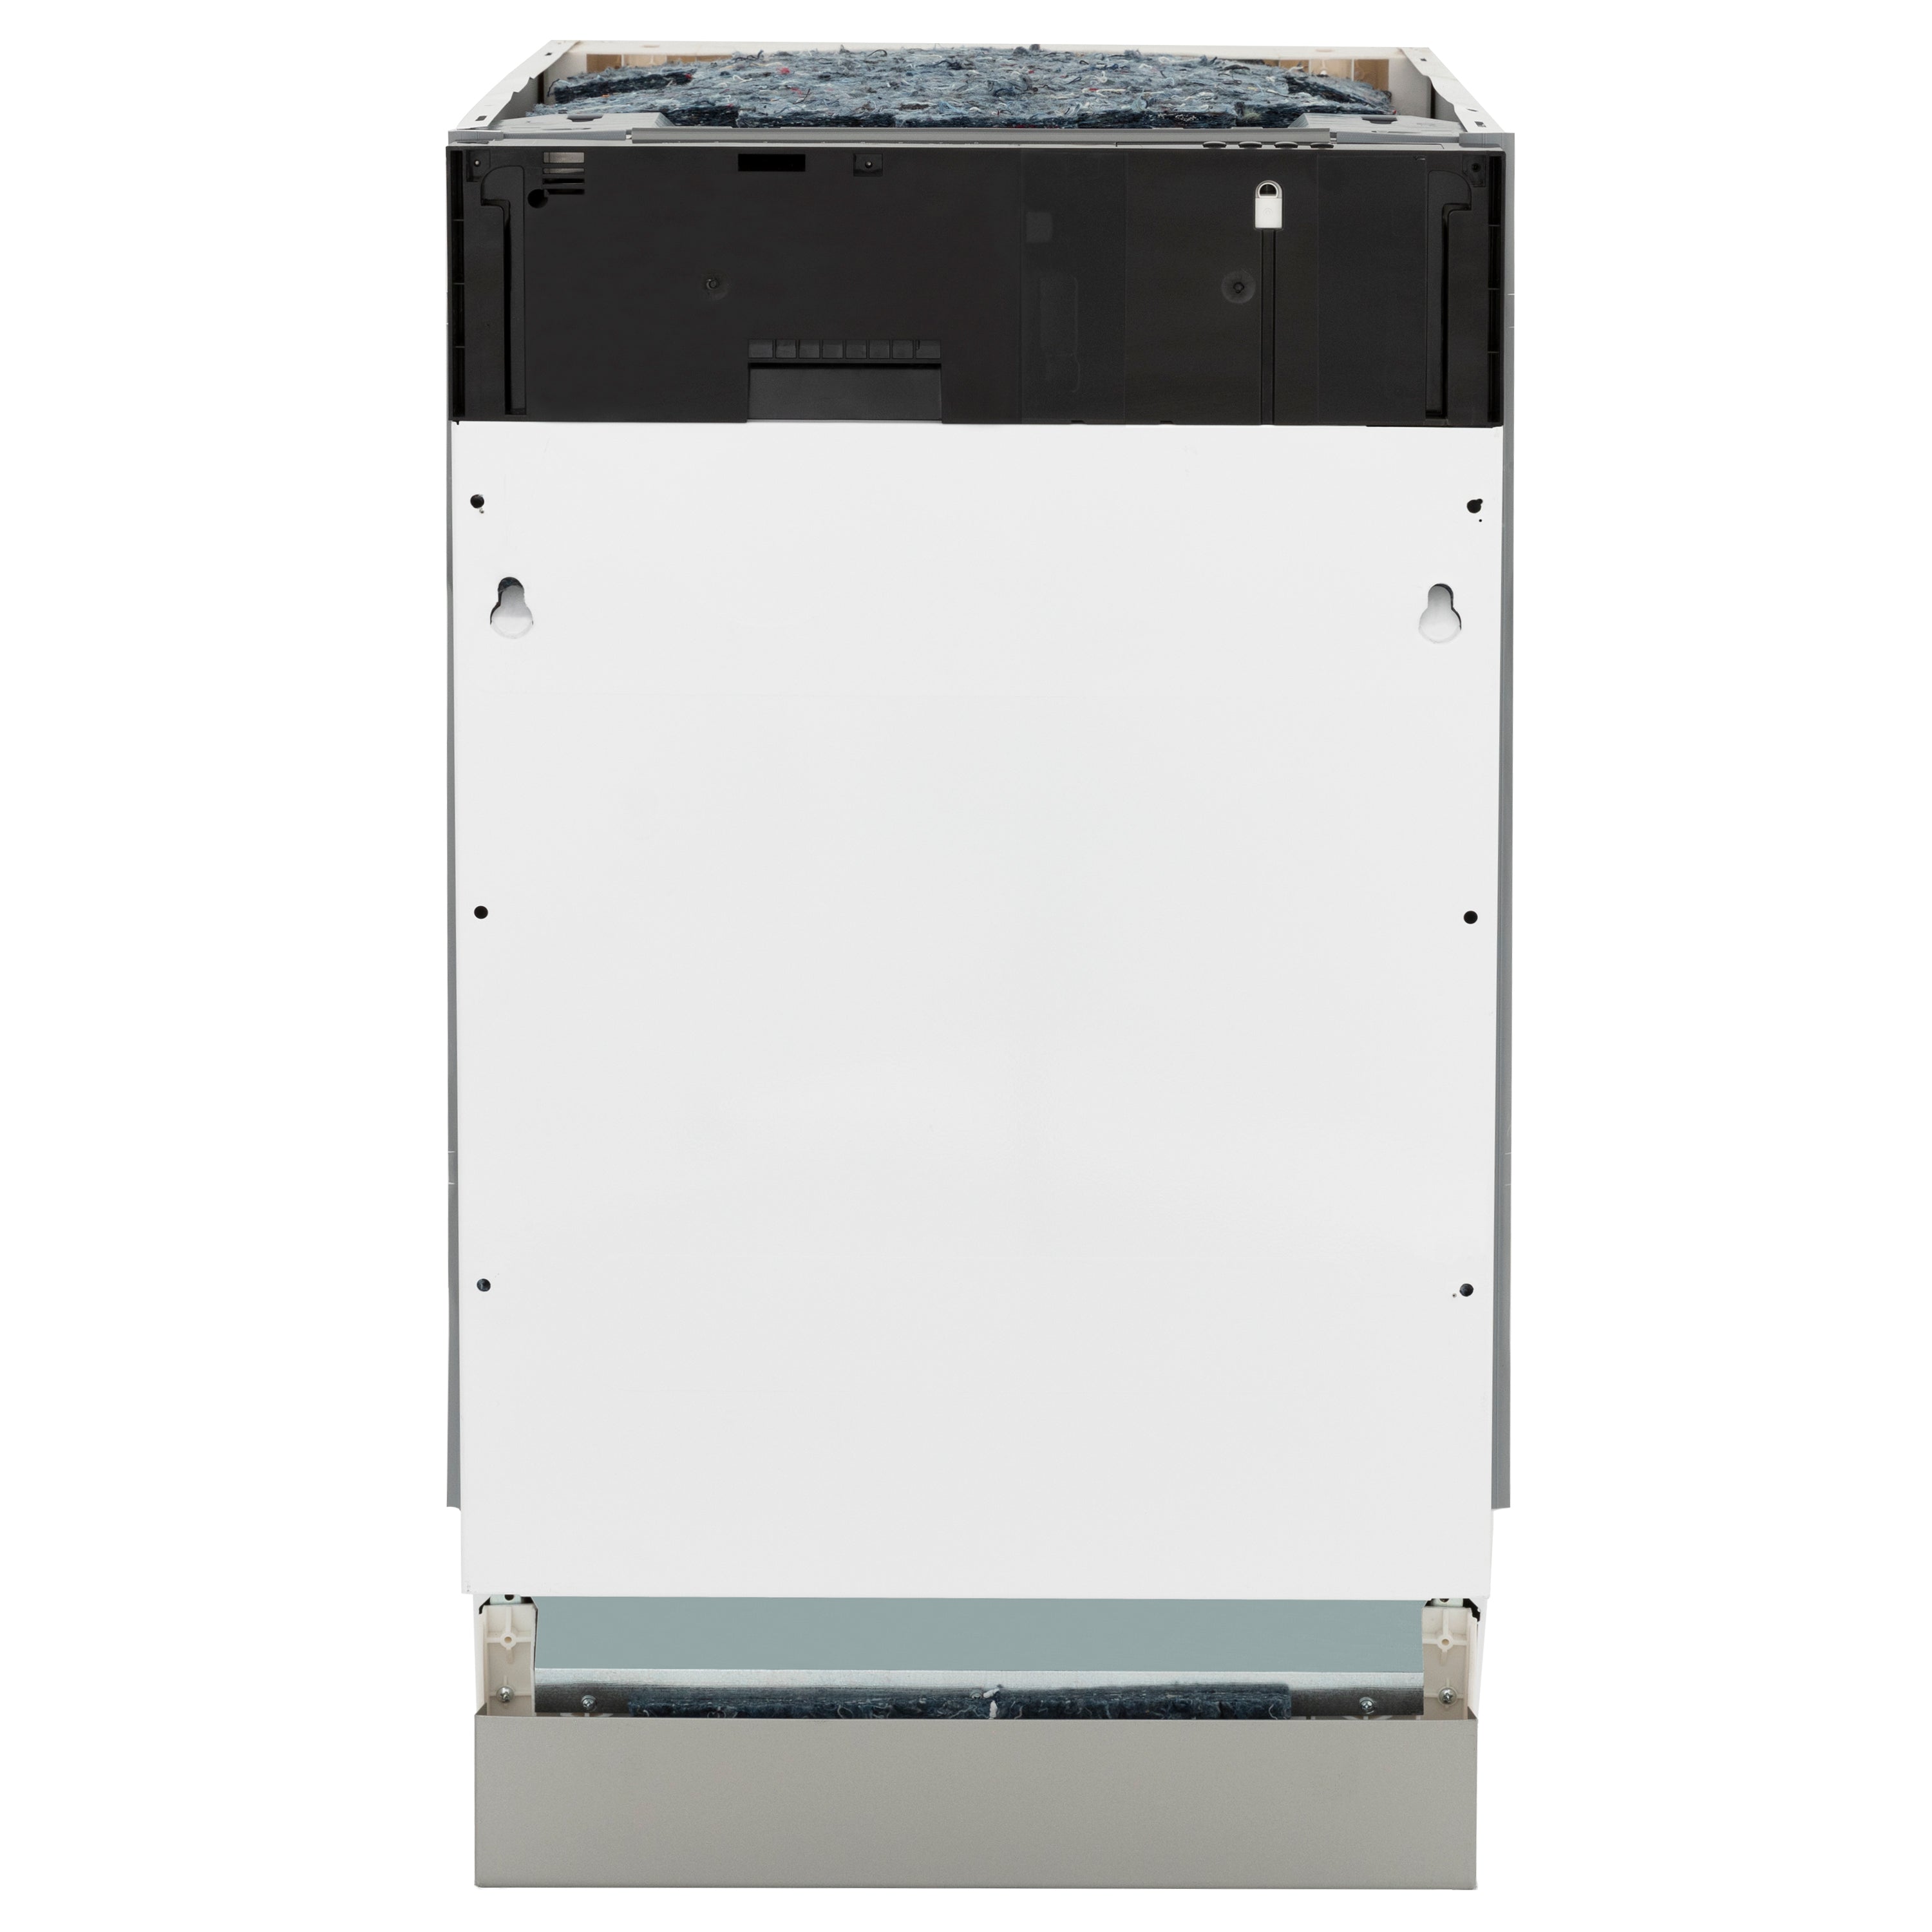 ZLINE 18" Tallac Series 3rd Rack Top Control Built-In Dishwasher in Custom Panel Ready with Stainless Steel Tub, 51dBa